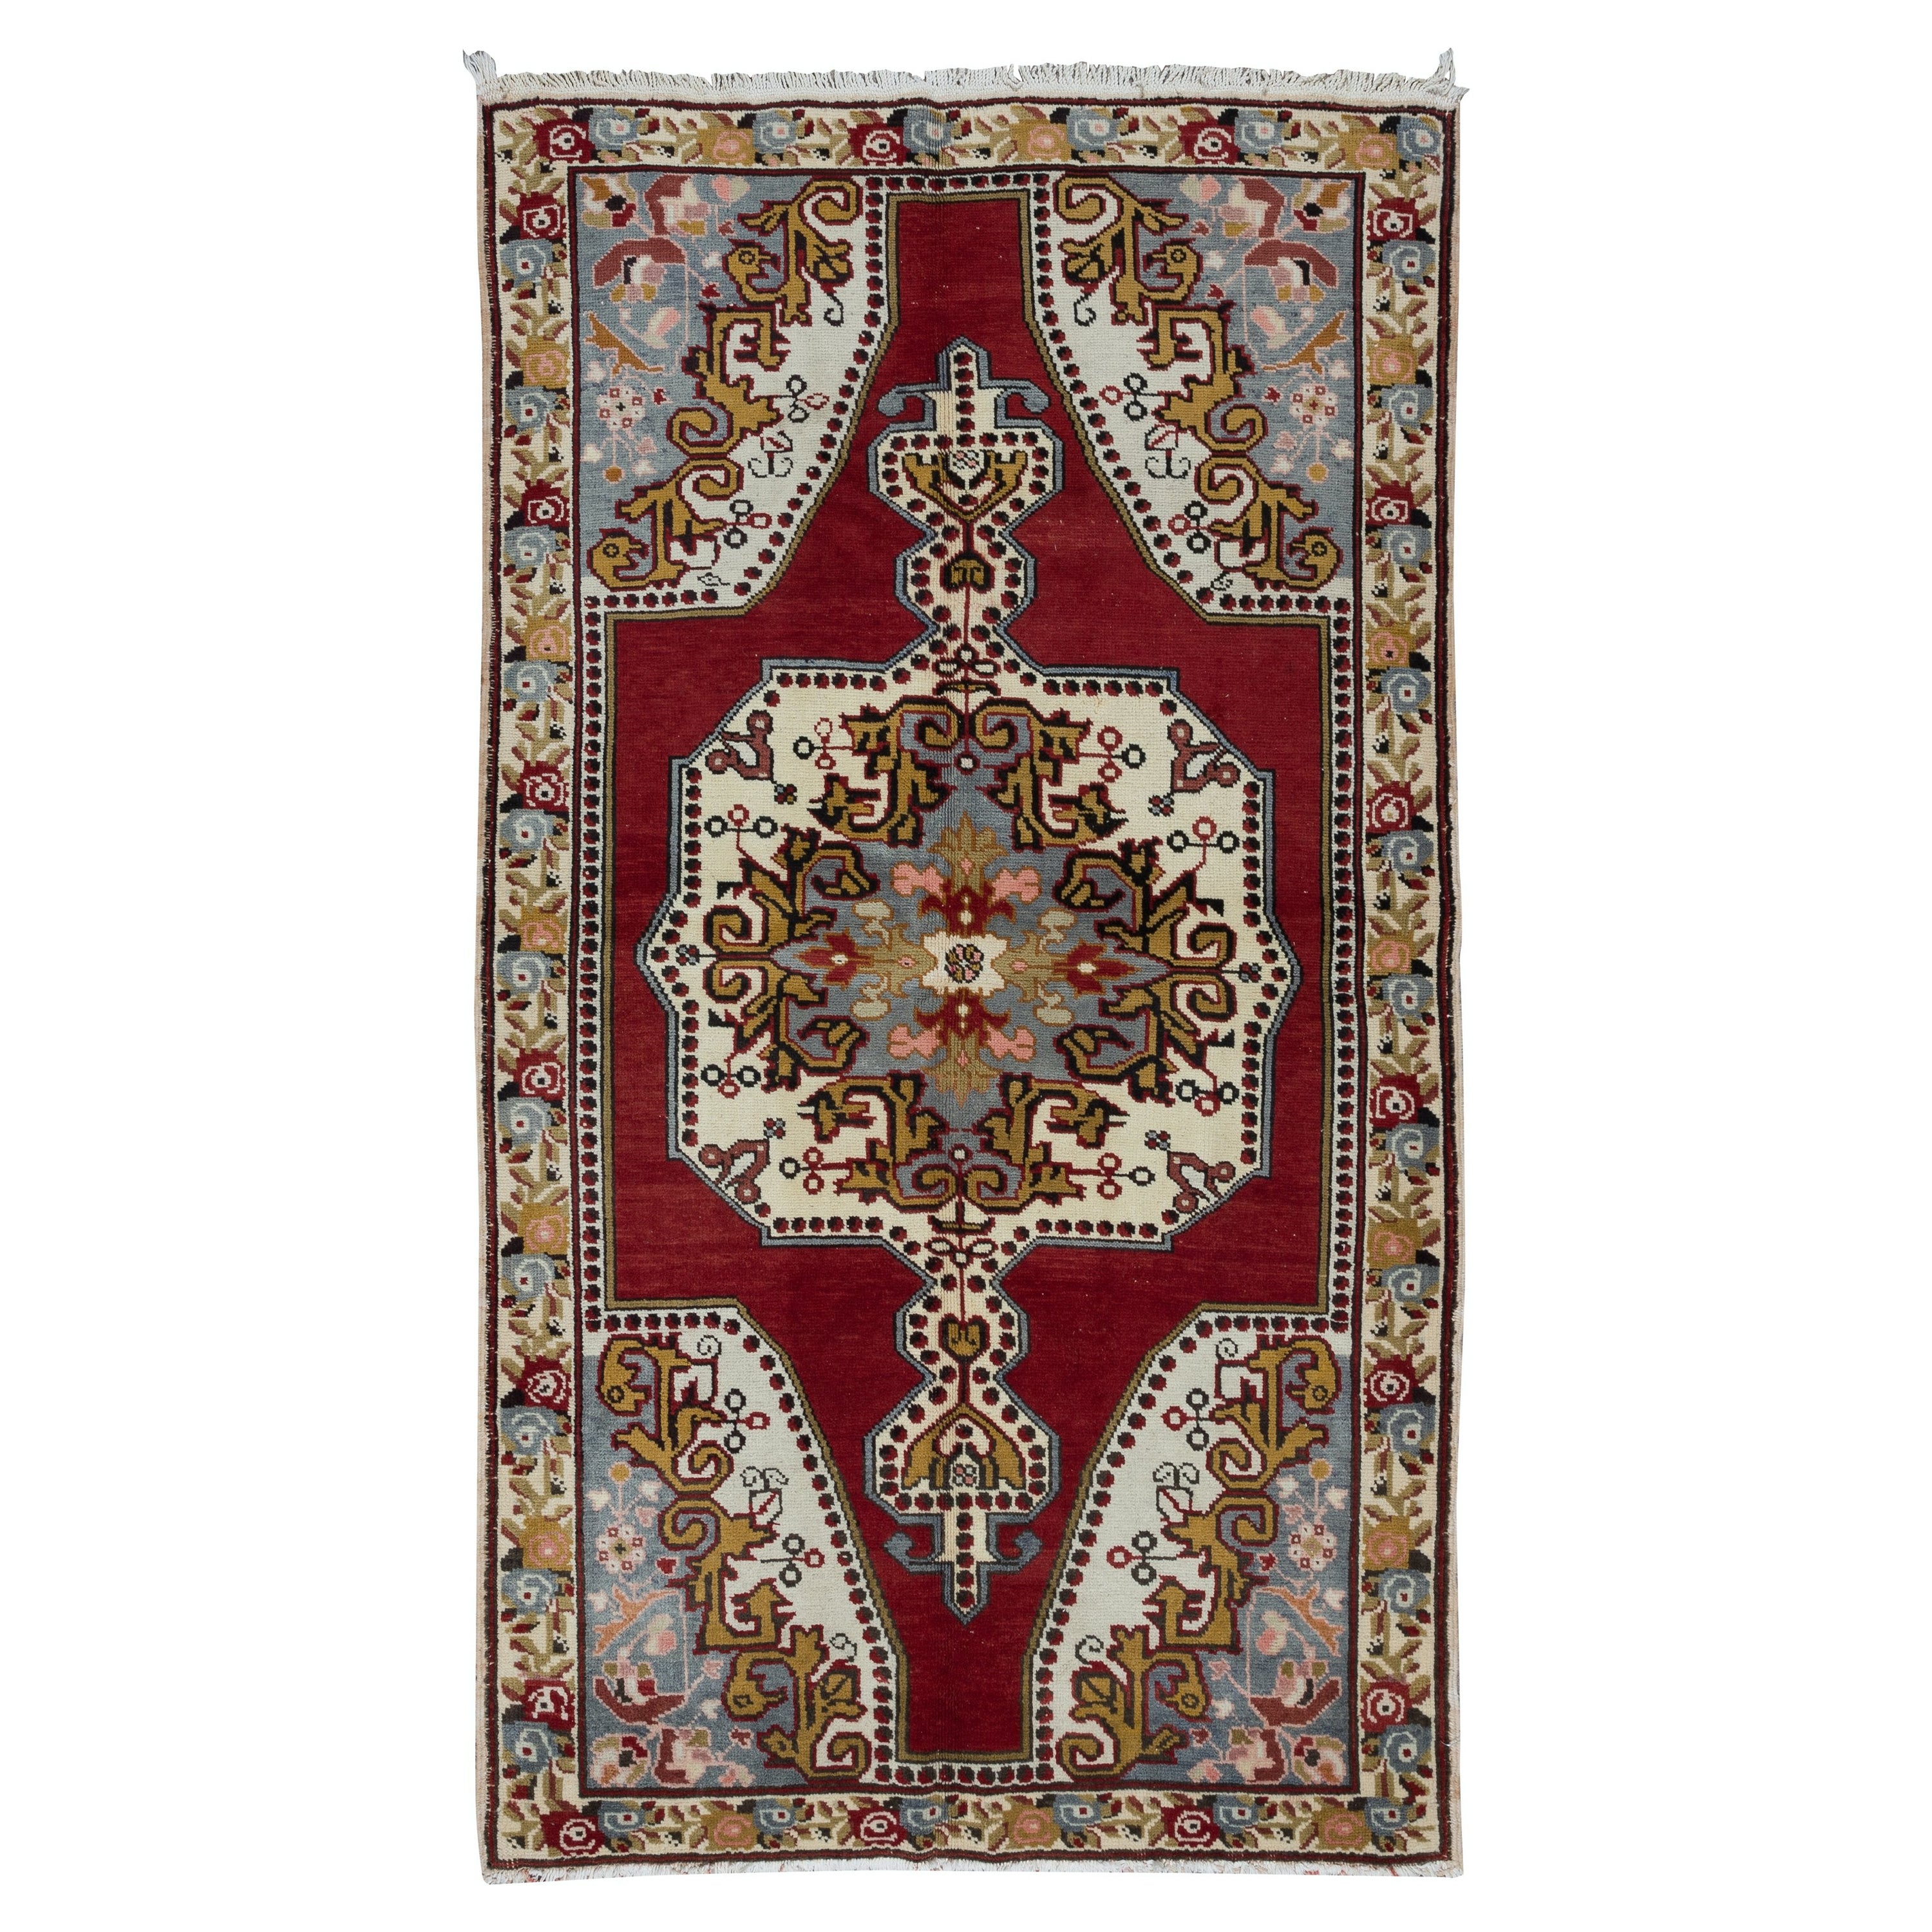 4.6x8 Ft Traditional Oriental Rug in Burgundy Red, 1960s Handmade Turkish Carpet For Sale